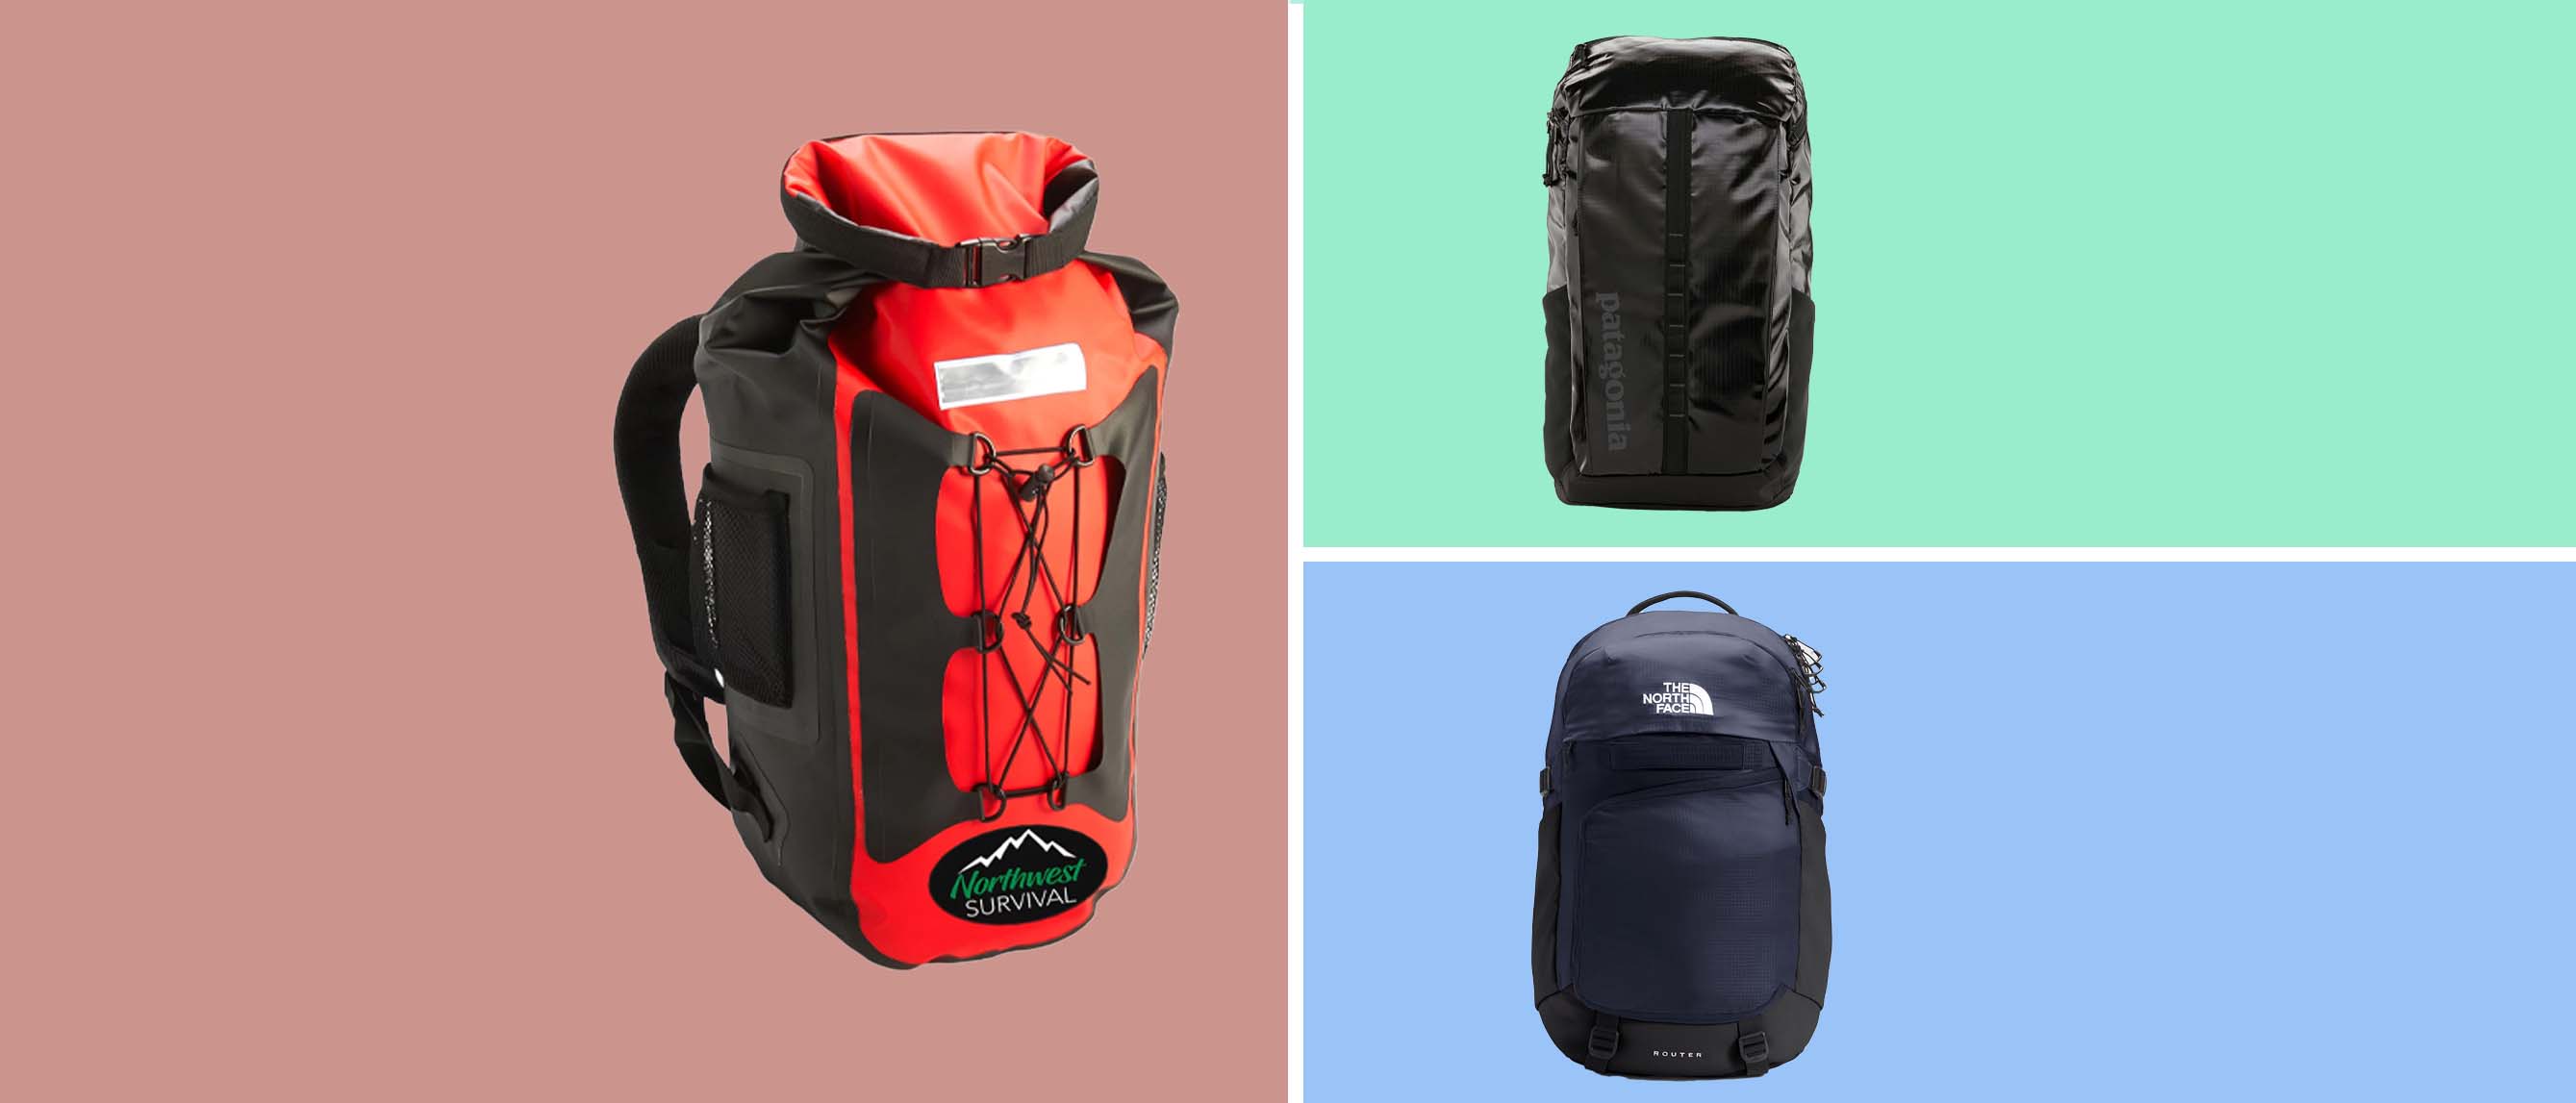 backpacks from northface and patagonia